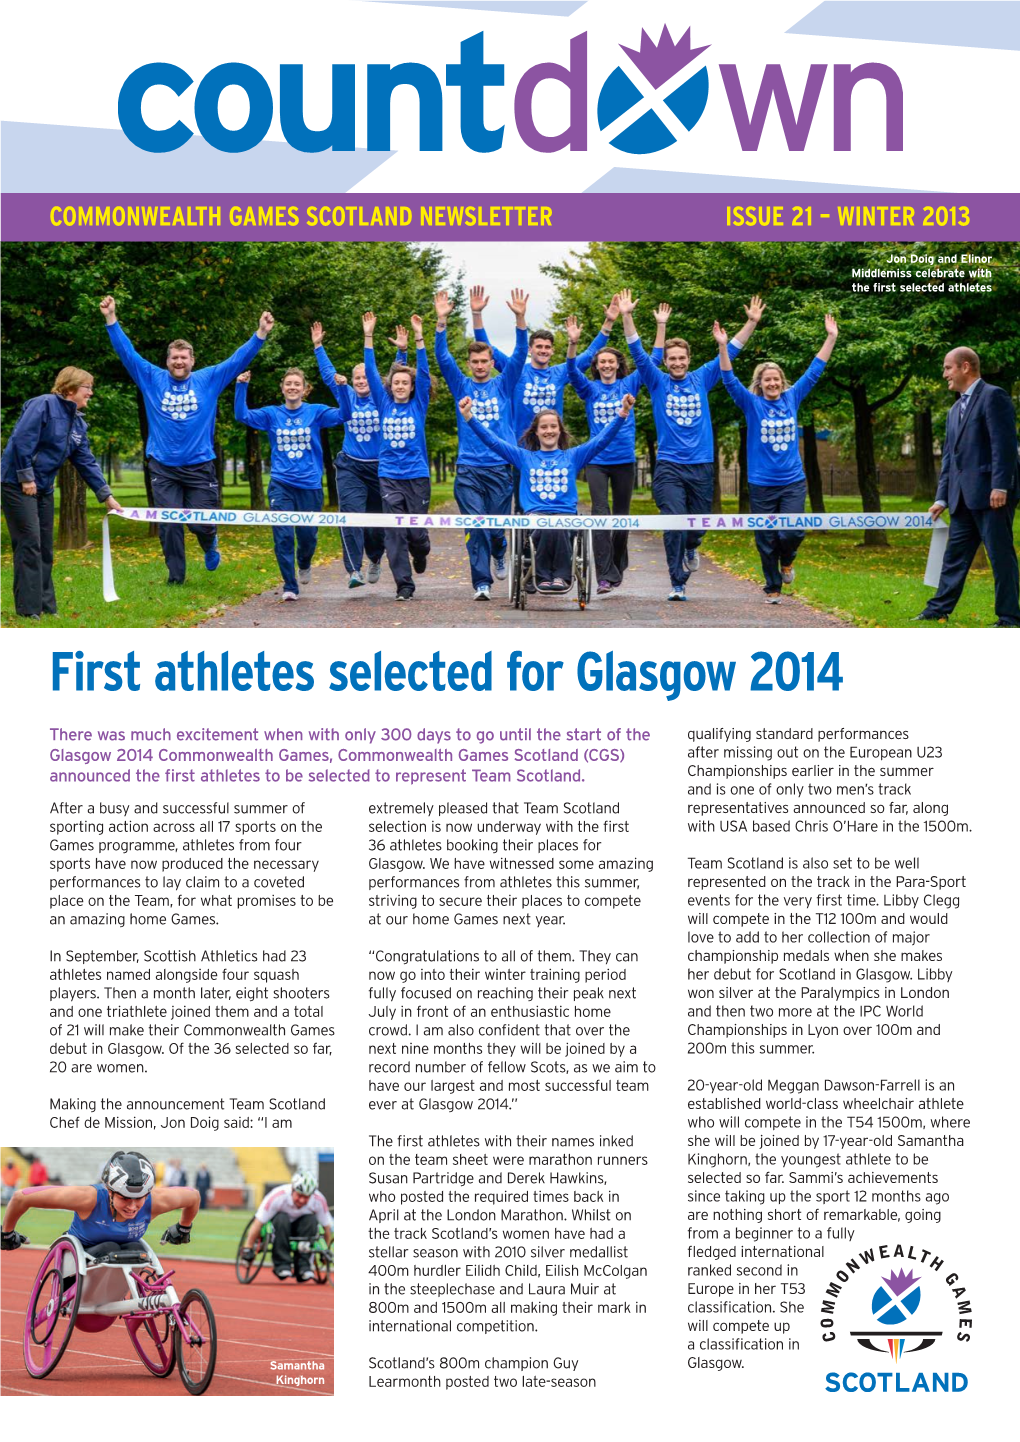 First Athletes Selected for Glasgow 2014